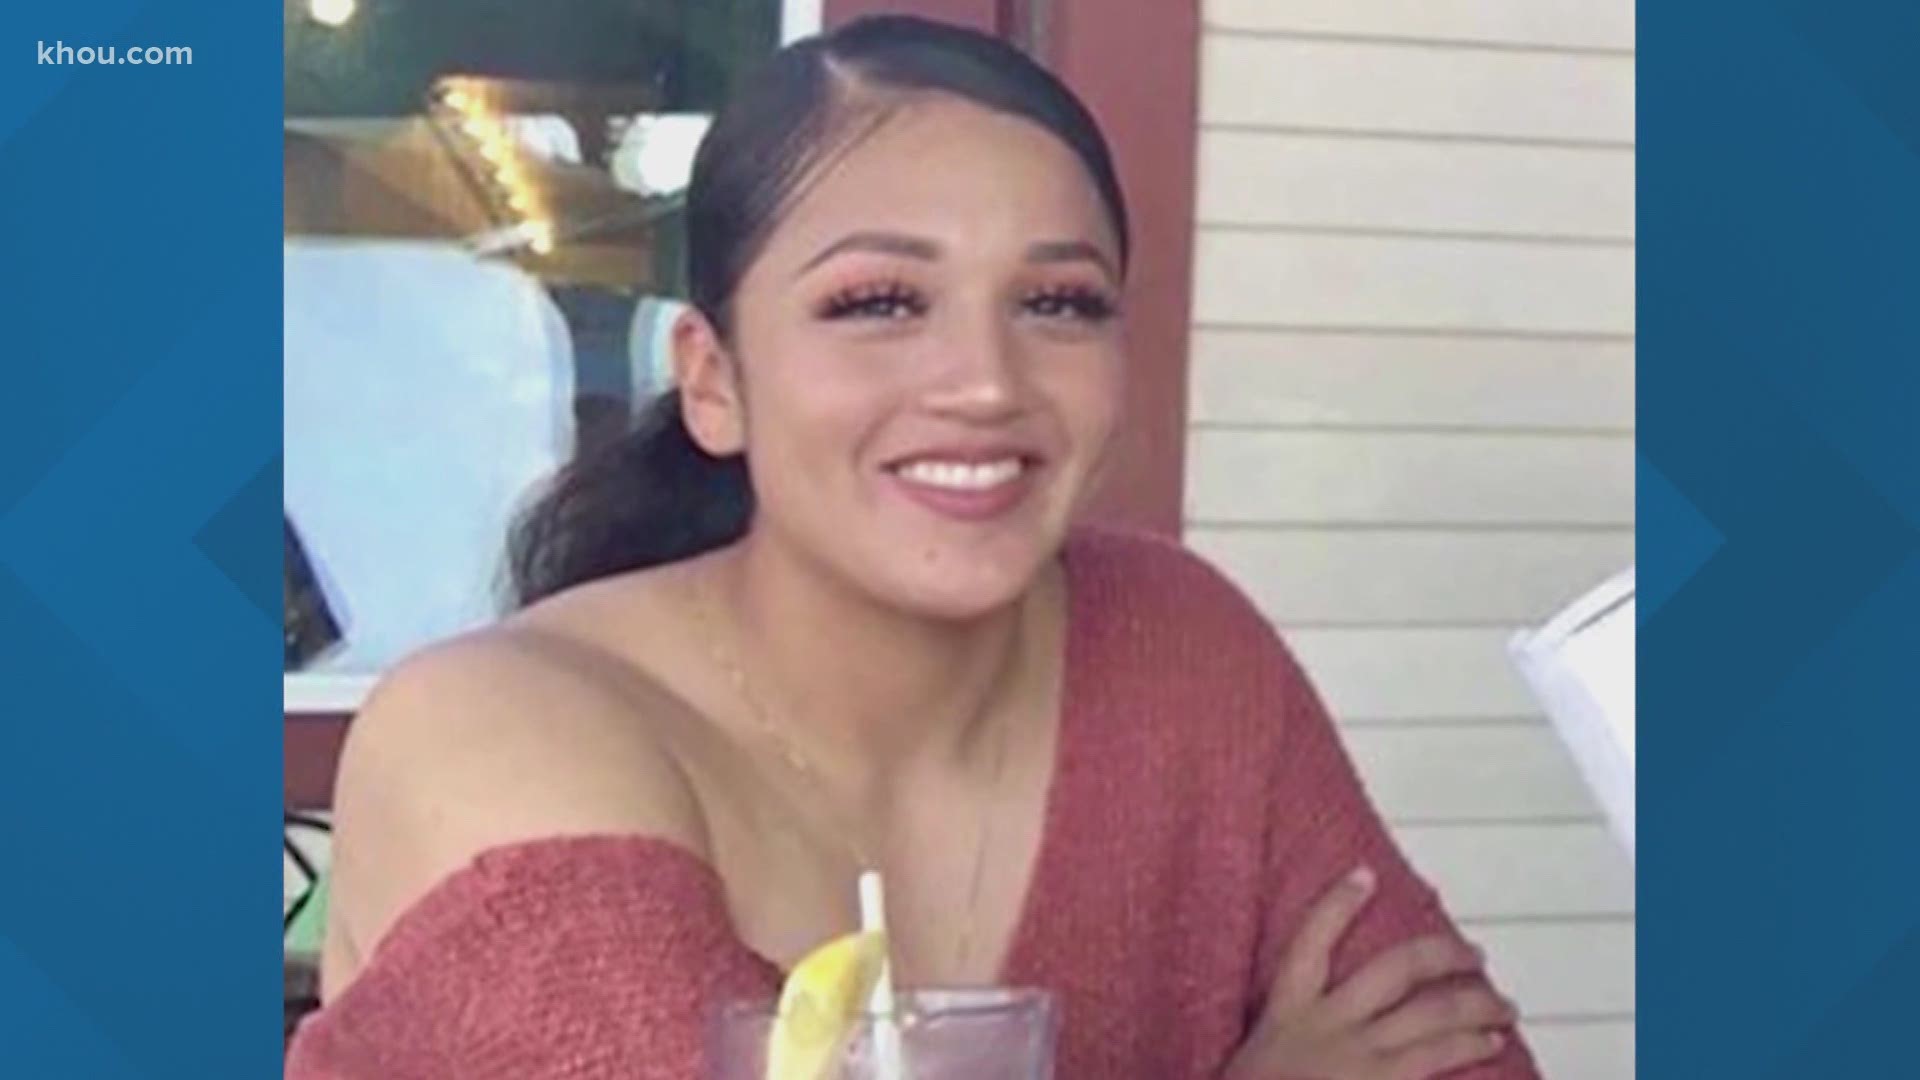 The family of Vanessa Guillen has claimed she was sexually harassed before she went missing.